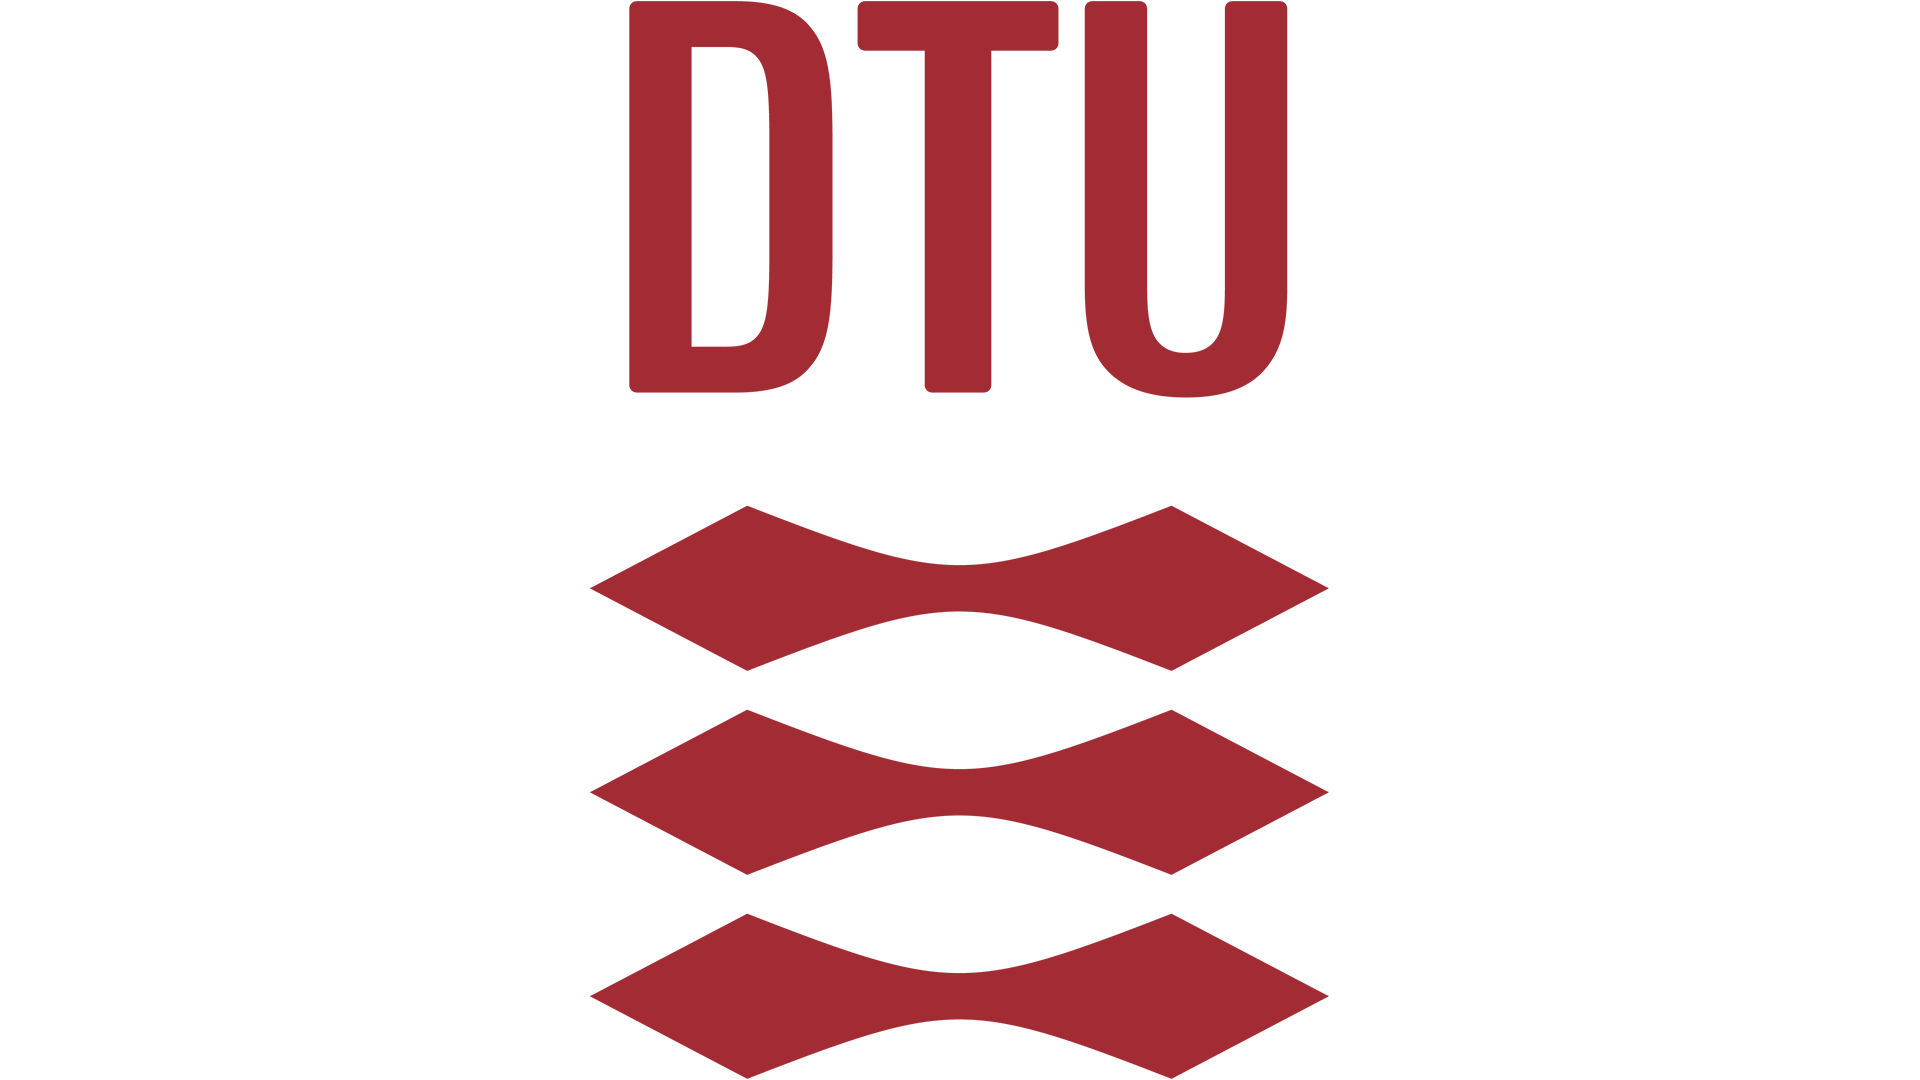 The logo of the DTU